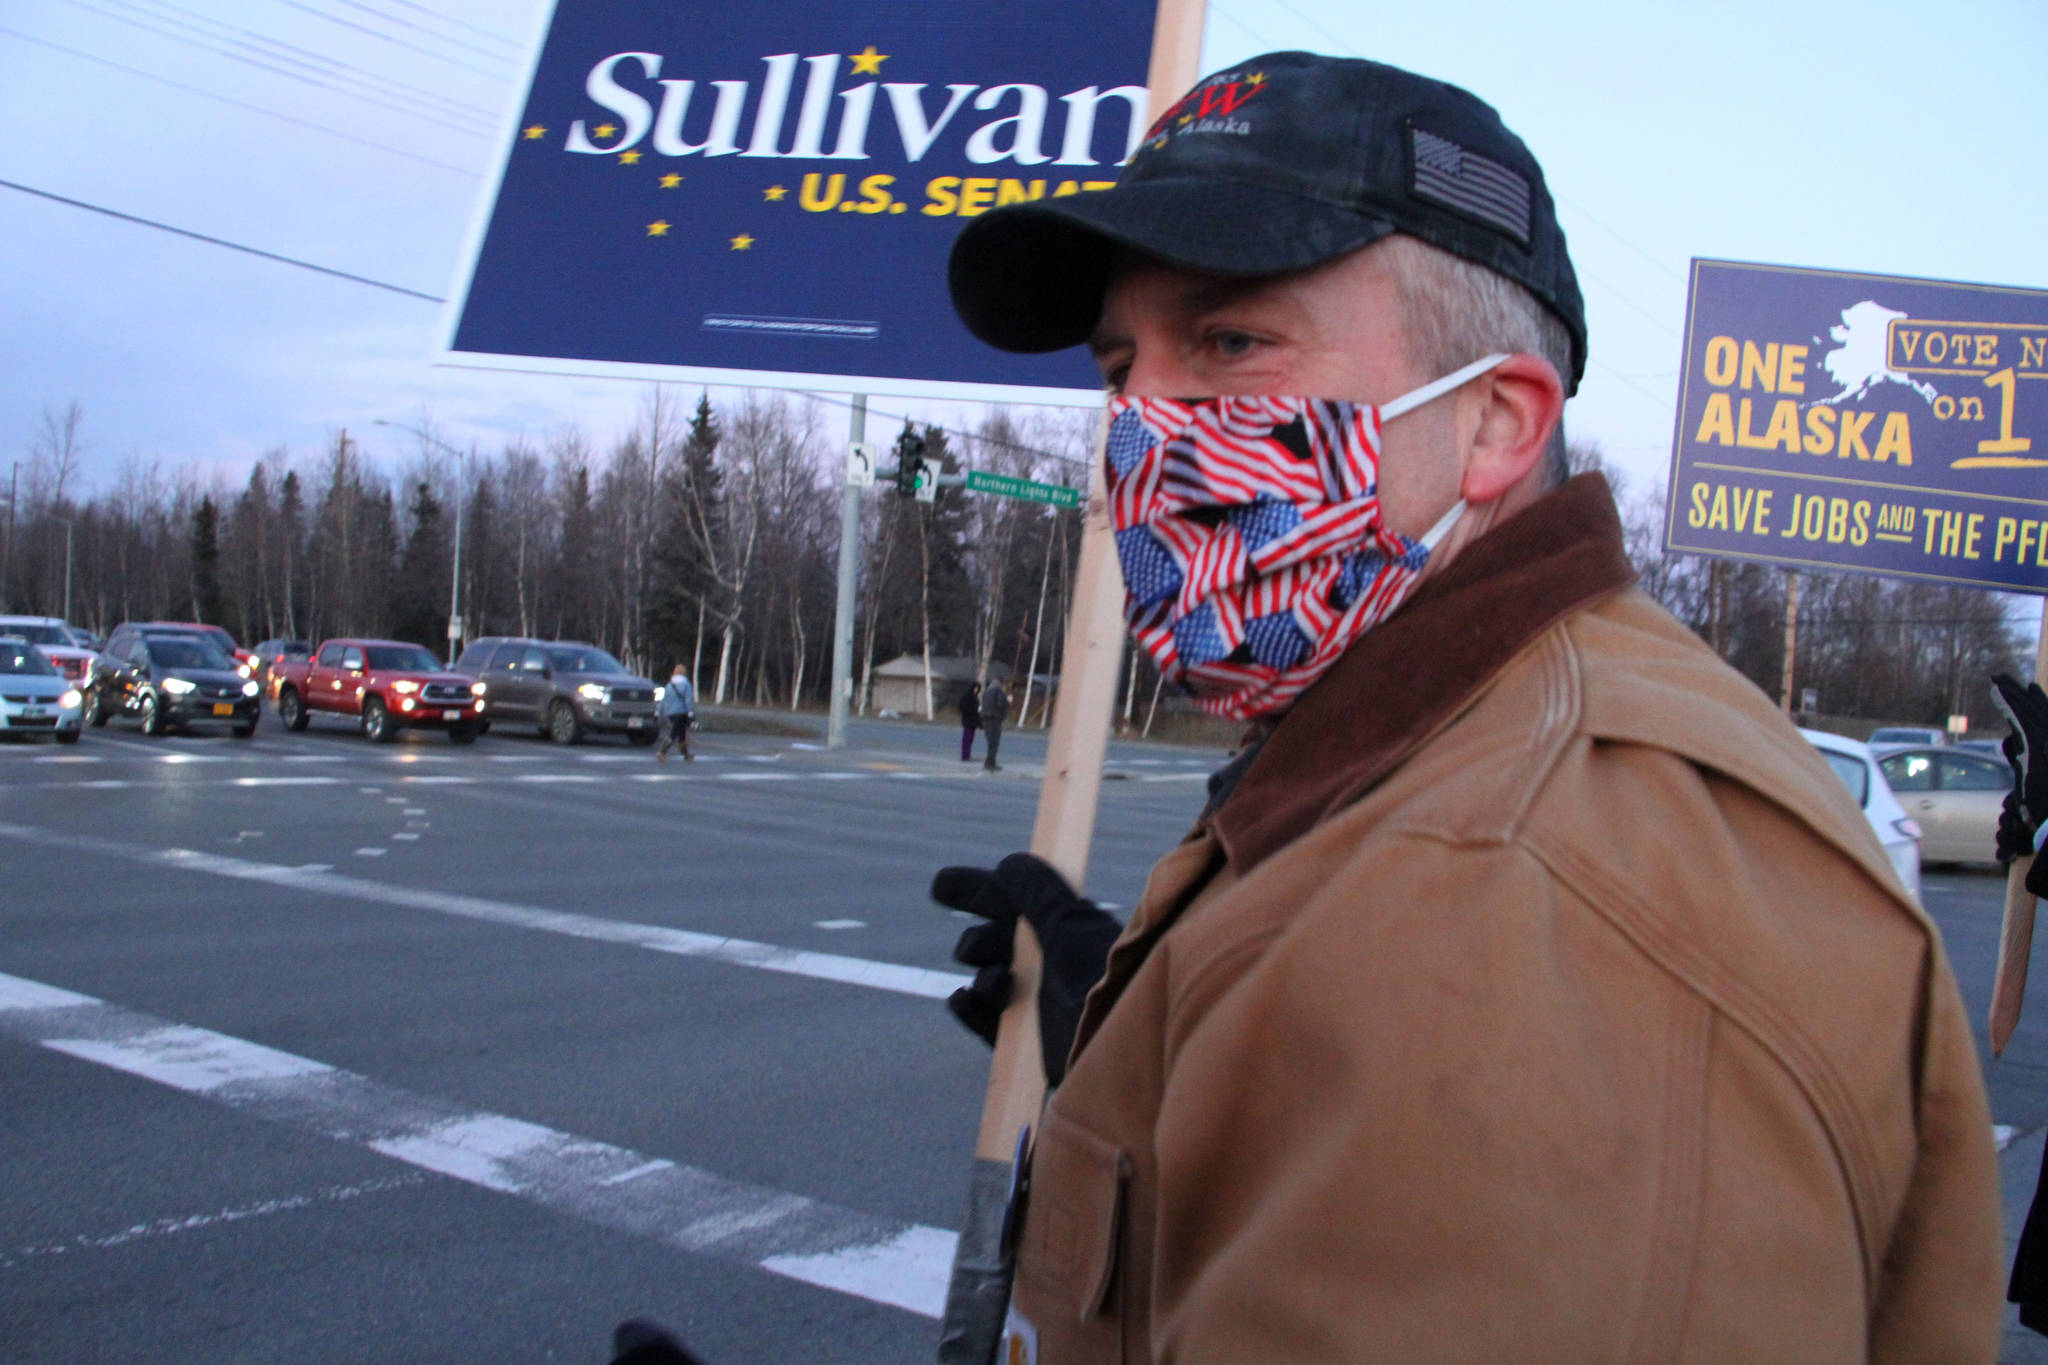 In this Nov. 2, 2020, file photo, Republican U.S. Sen. Dan Sullivan waves a sign at a busy intersection in Anchorage, Alaska. Sen. Sullivan on Wednesday, Nov. 11, 2020, won re-election in Alaska, defeating independent Al Gross. (AP Photo/Mark Thiessen, File)